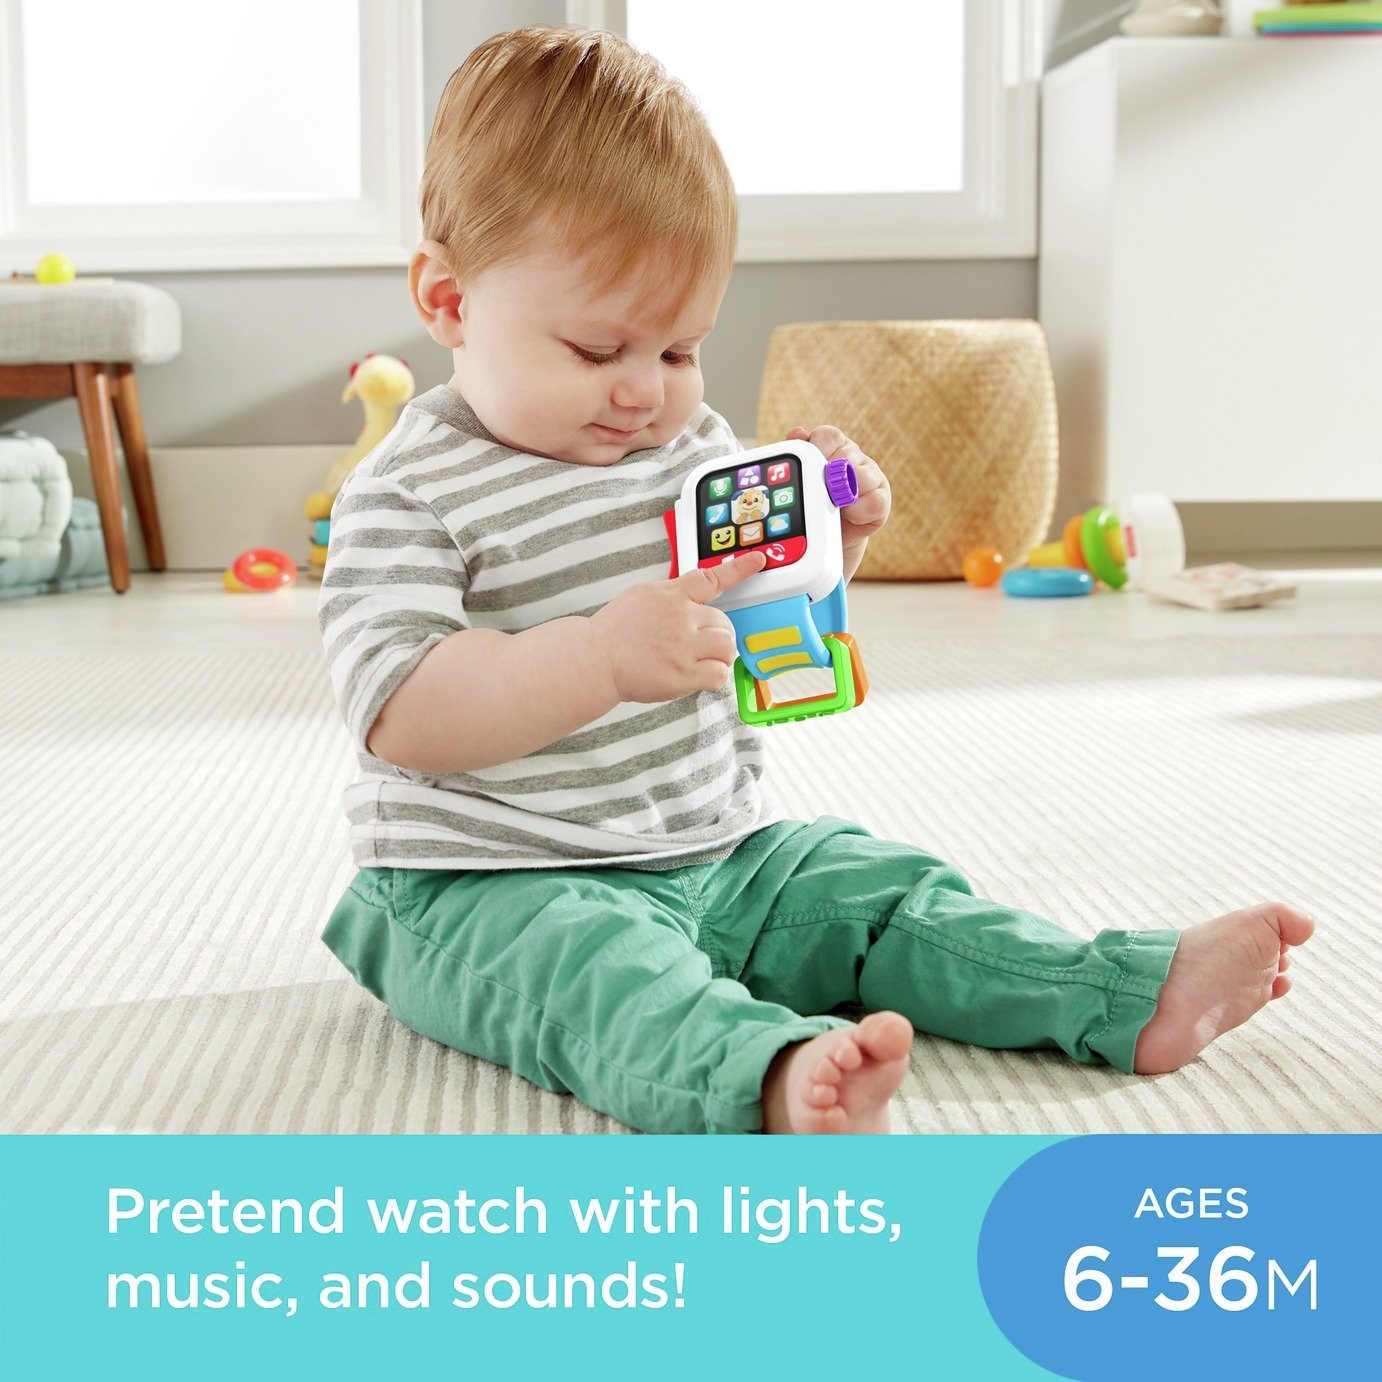 Fisher-Price Laugh and Learn Smart Watch Reviews - Updated April 2022